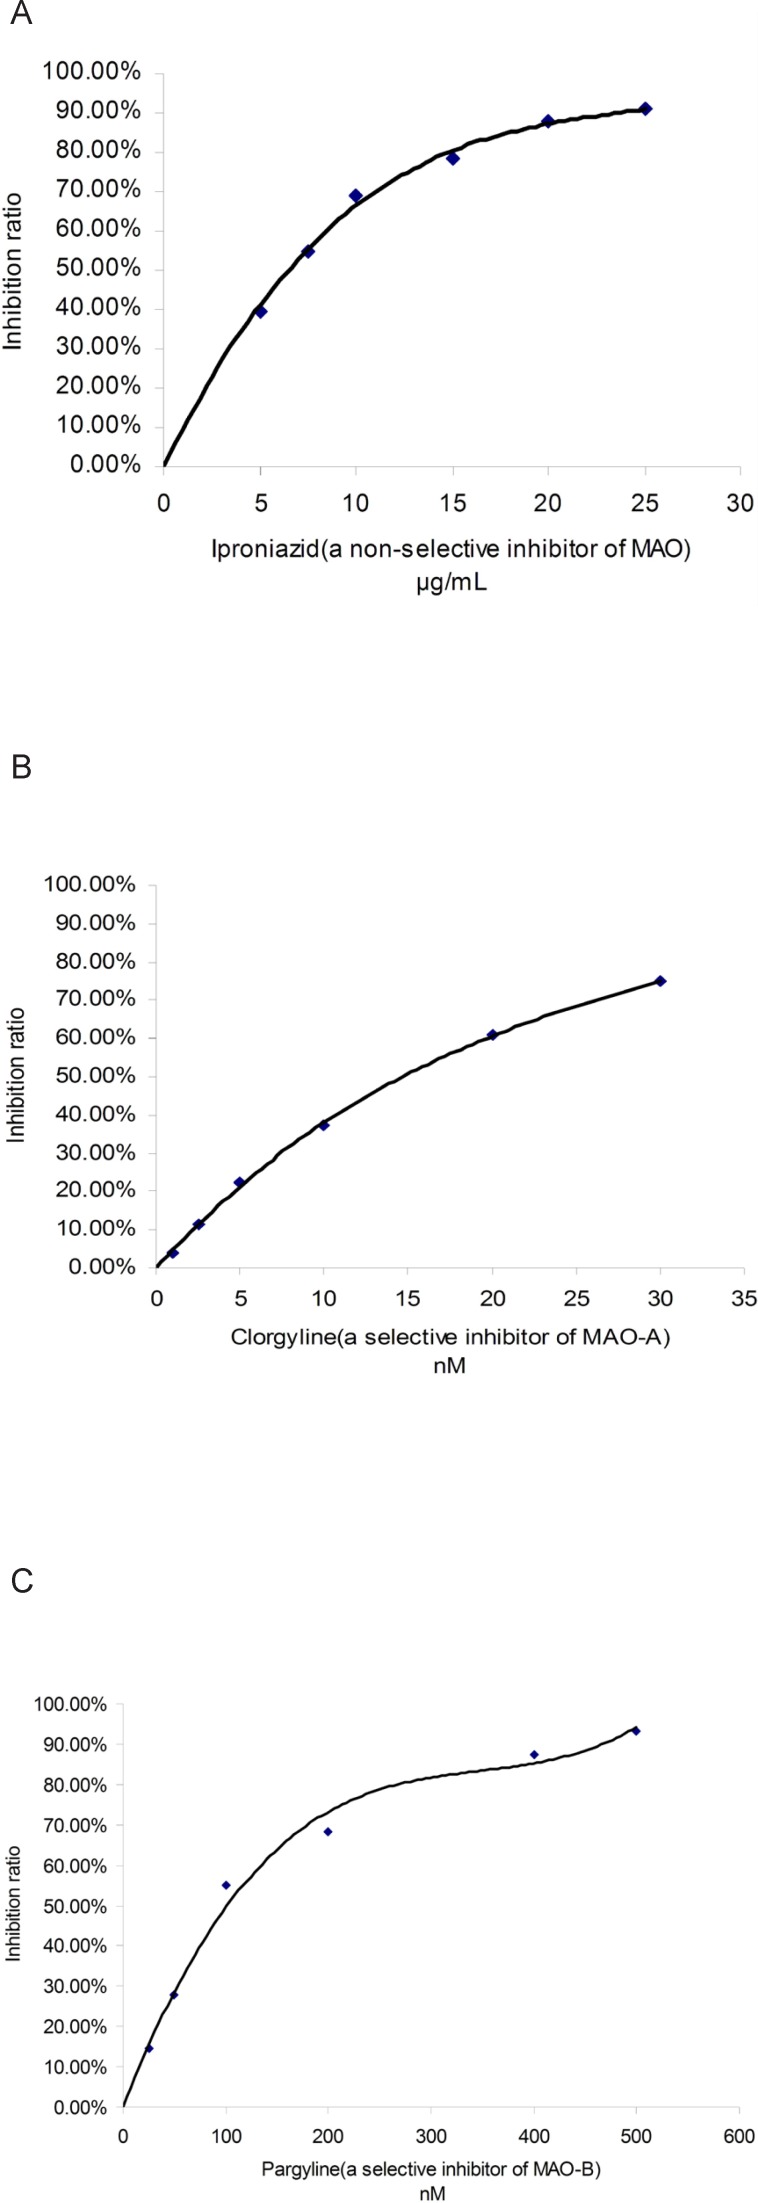 Inhibitory curve of three known inhibitors against MAO. A: iproniazid against total MAO; B: clorgyline against MAO-A; C: pargyline against MAO-B